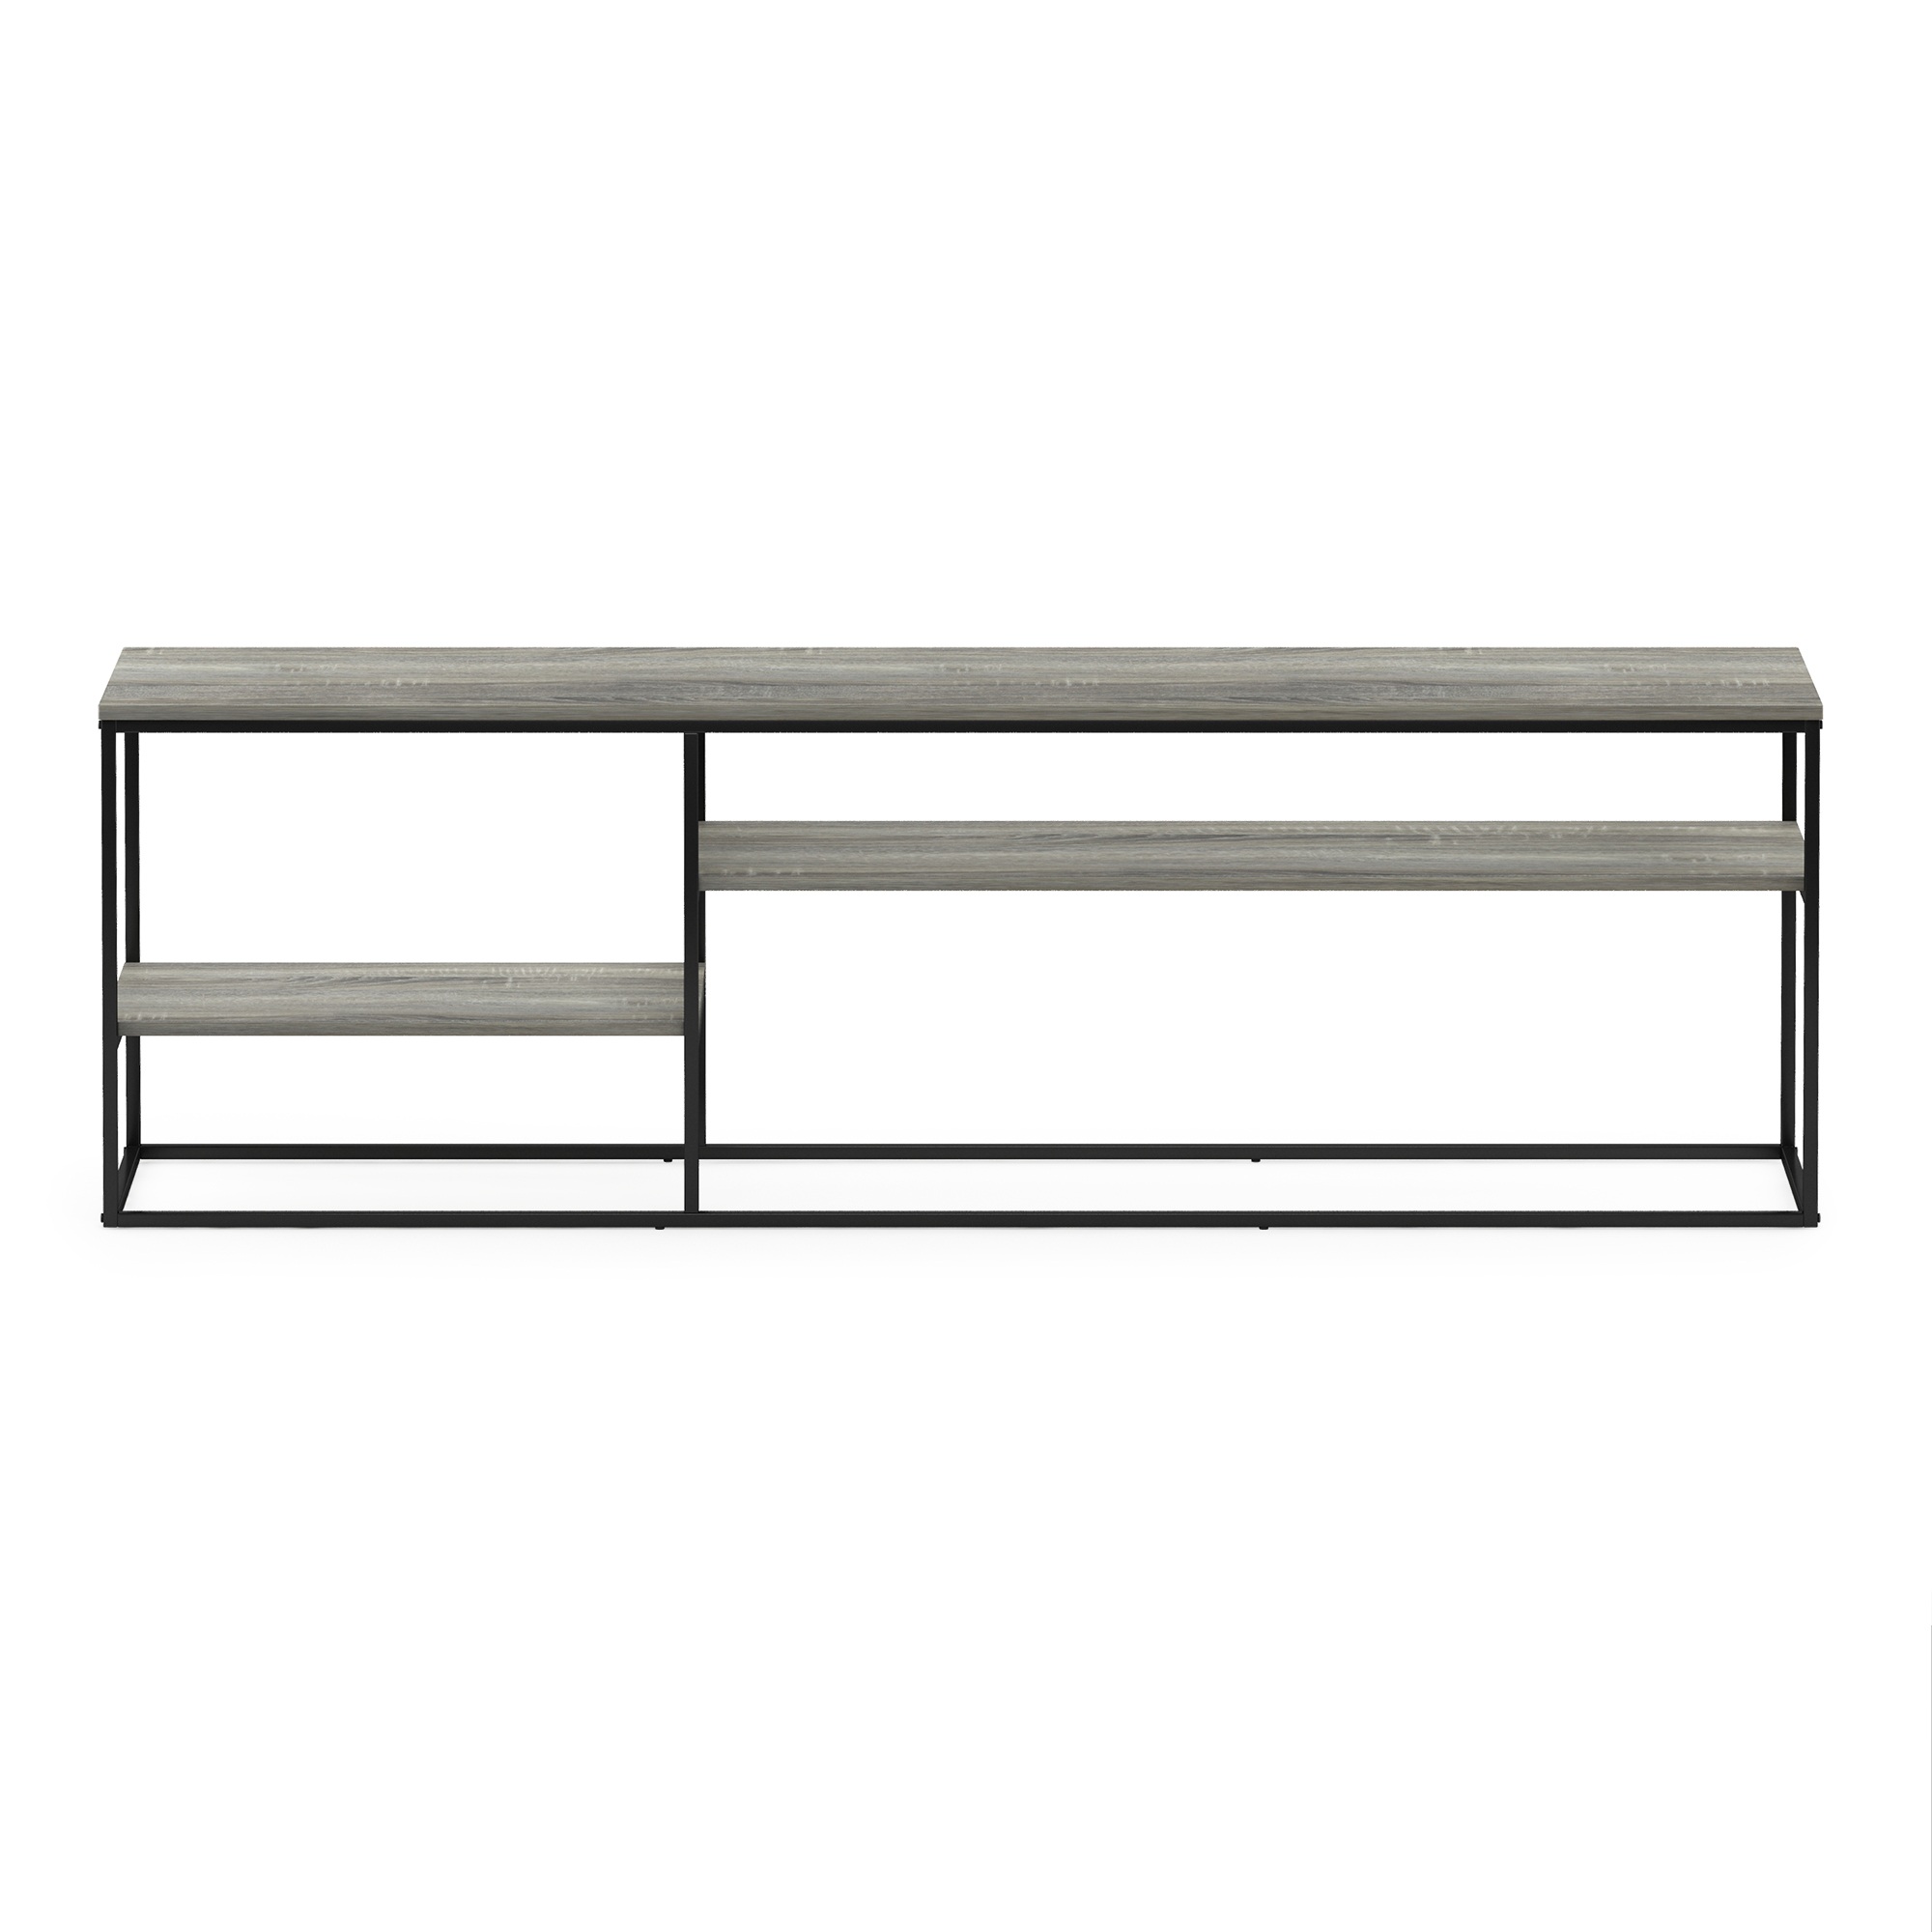 Furinno Moretti Modern Lifestyle TV Stand for TV up to 78 Inch, French Oak Grey - image 3 of 3